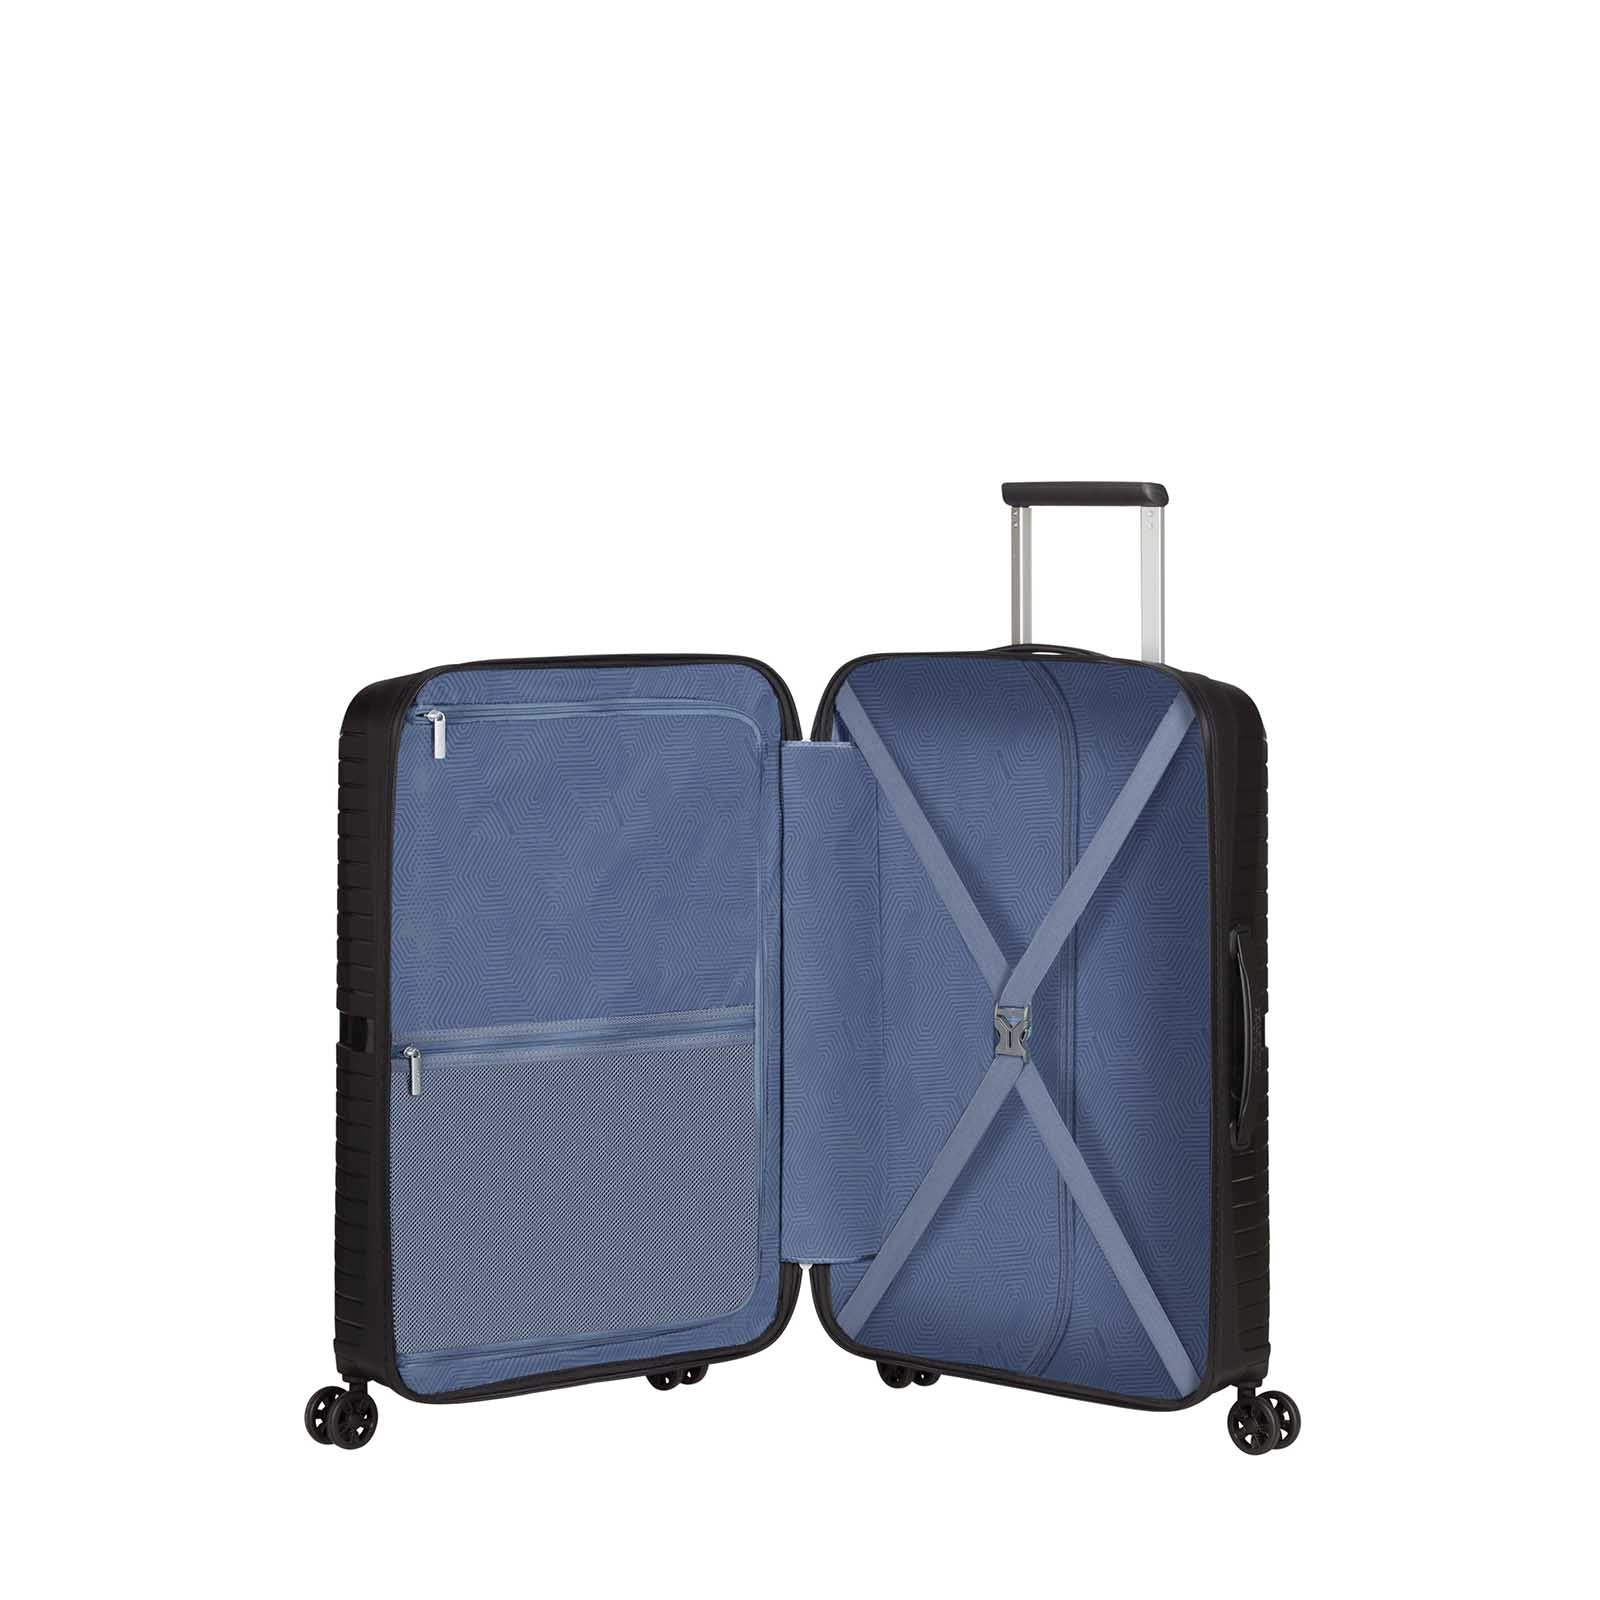 American-Tourister-Airconic-67cm-Suitcase-Onyx-Black-Open